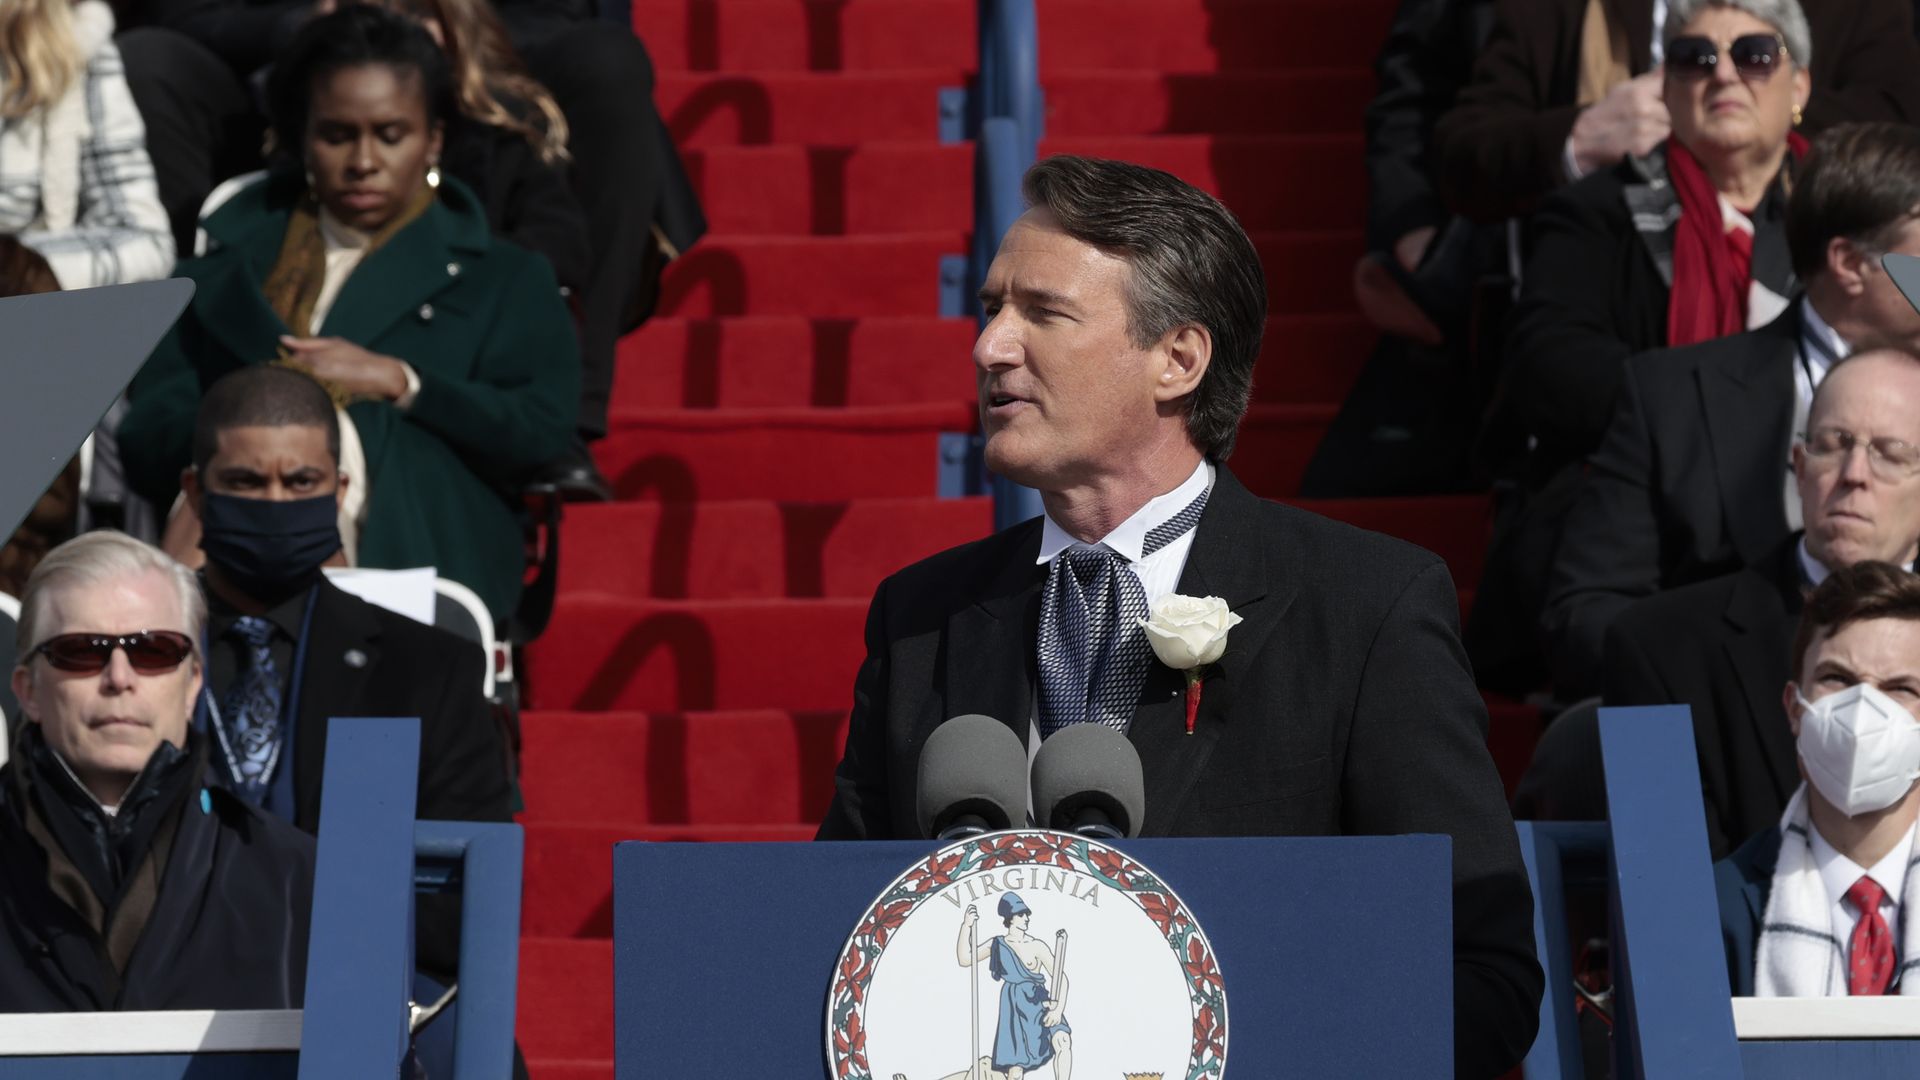 Virginia Governor Glenn Youngkin gives the inaugural address after being sworn in as the 74th governor of Virginia on the steps of the State Capitol on January 15, 2022 